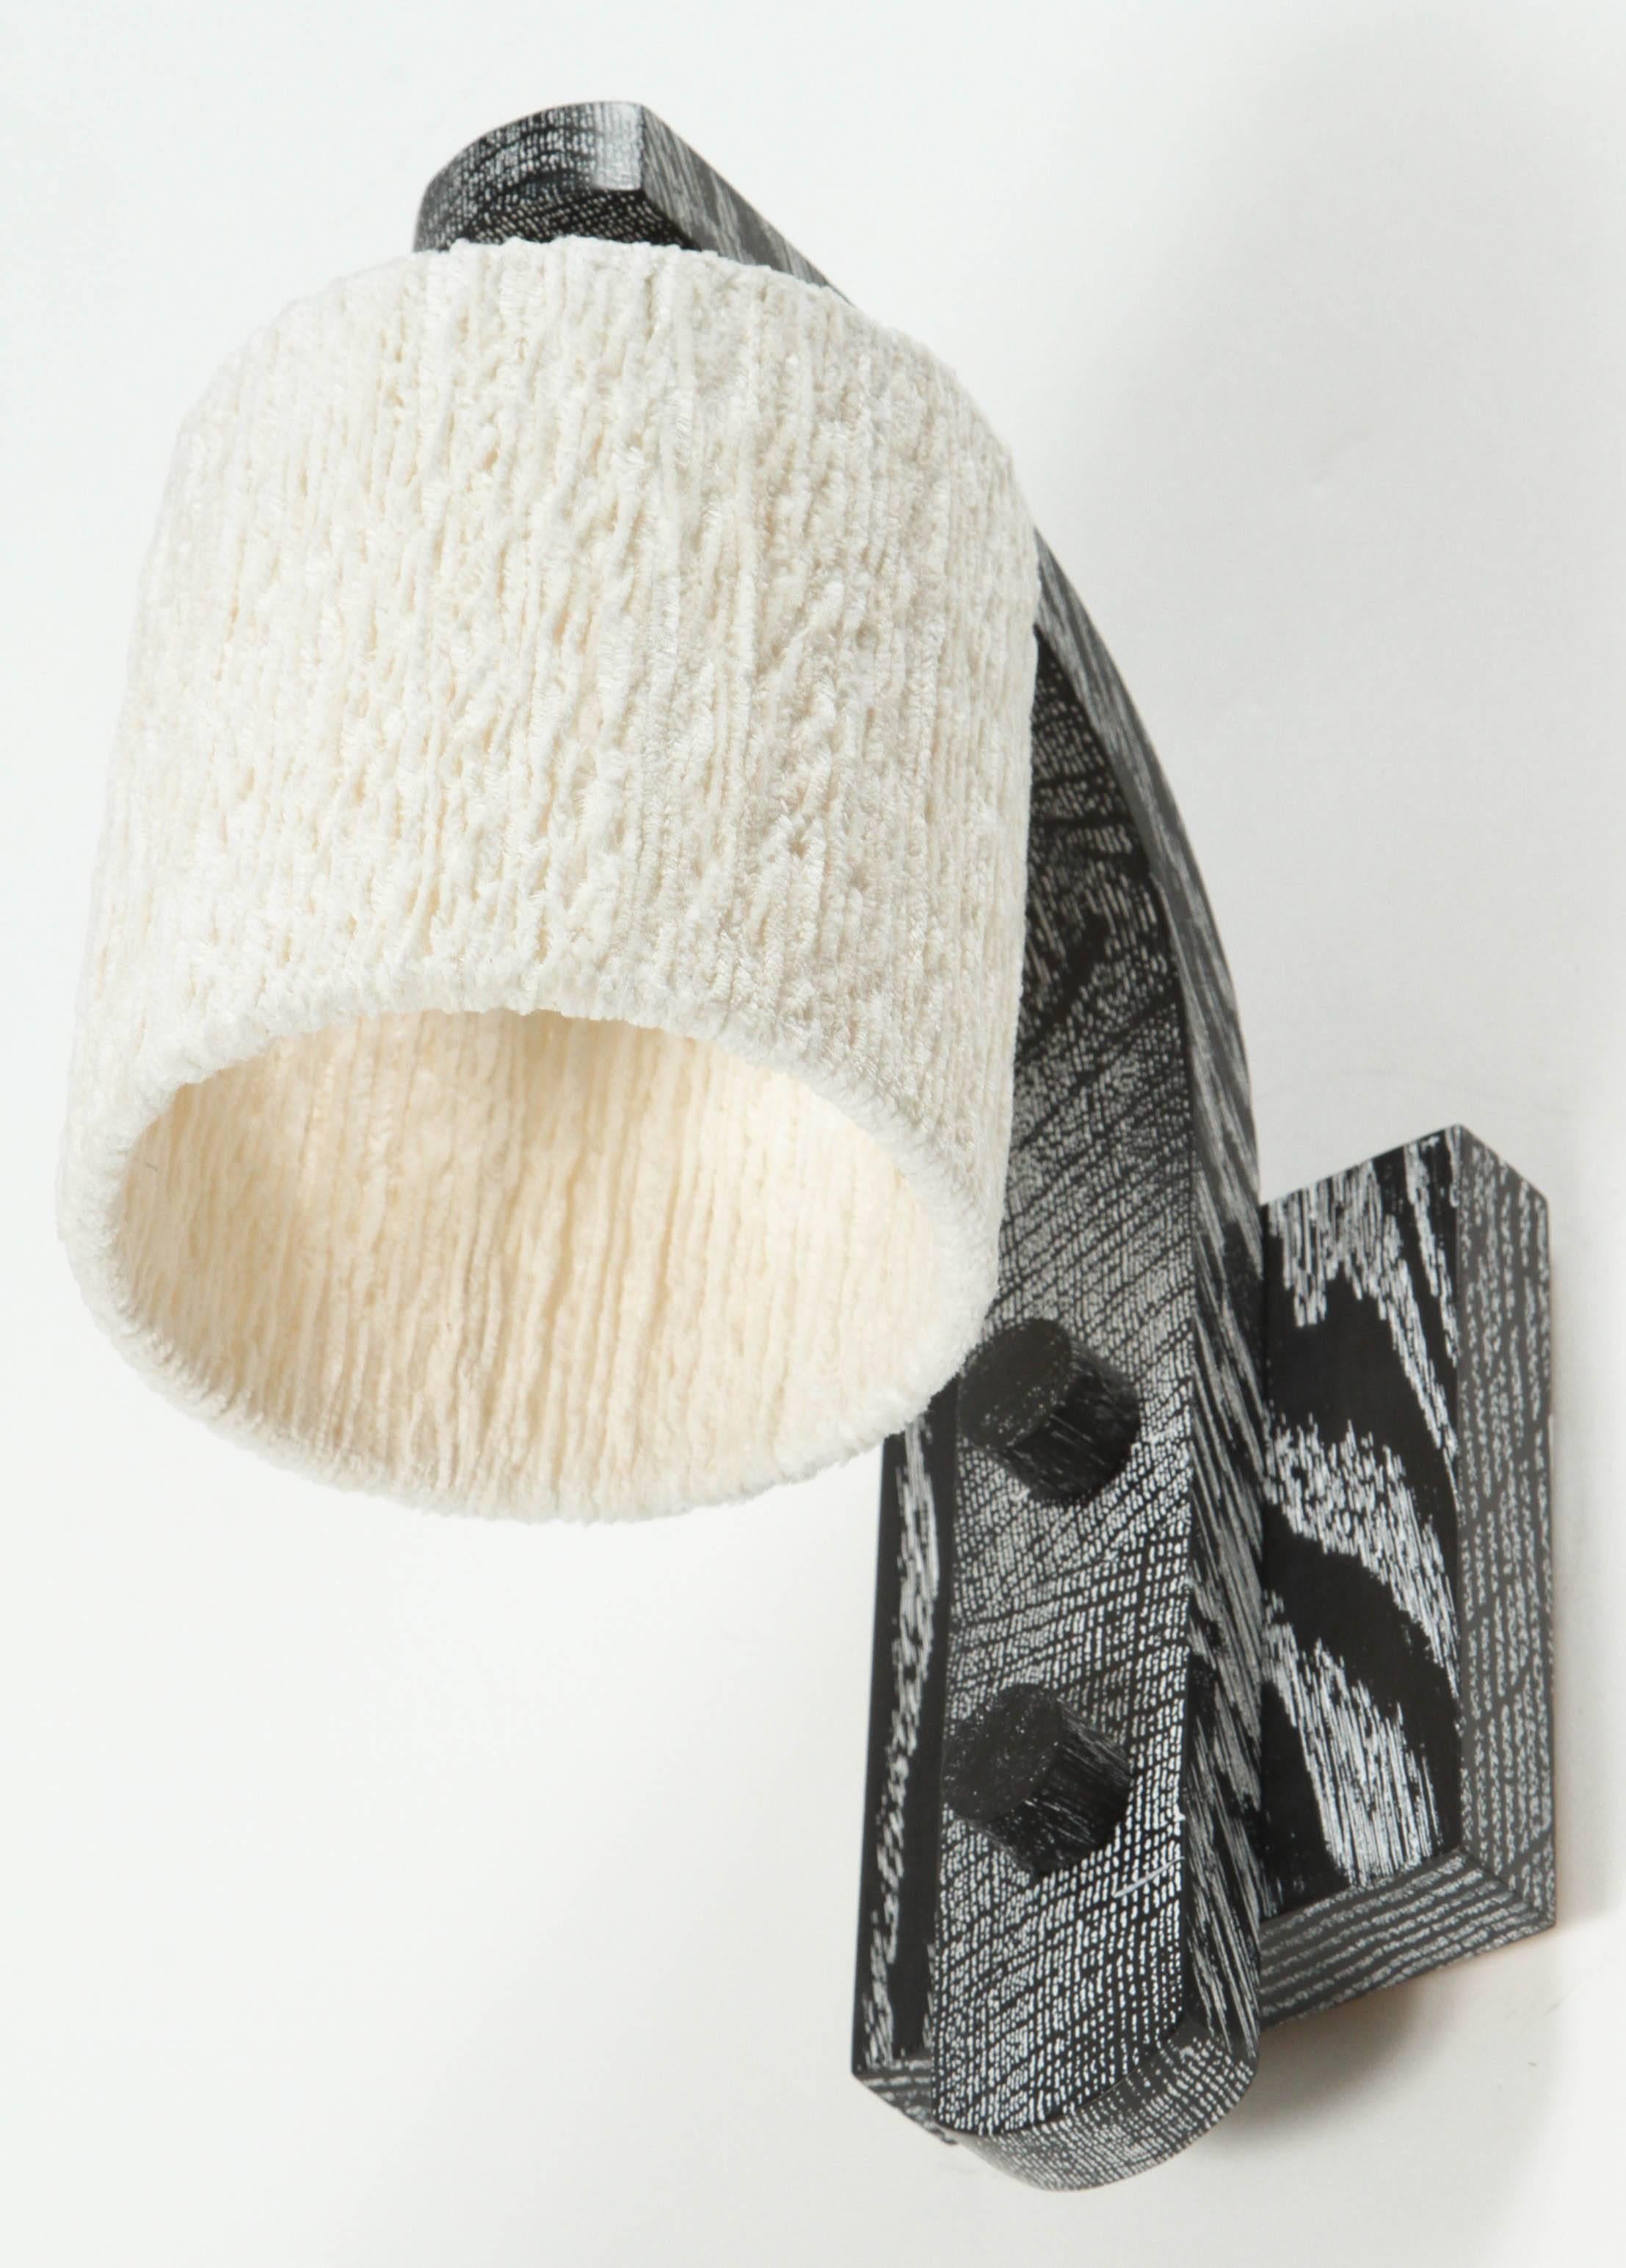 Paul Marra Oak Sconce with Cotton Chenille Shade 3